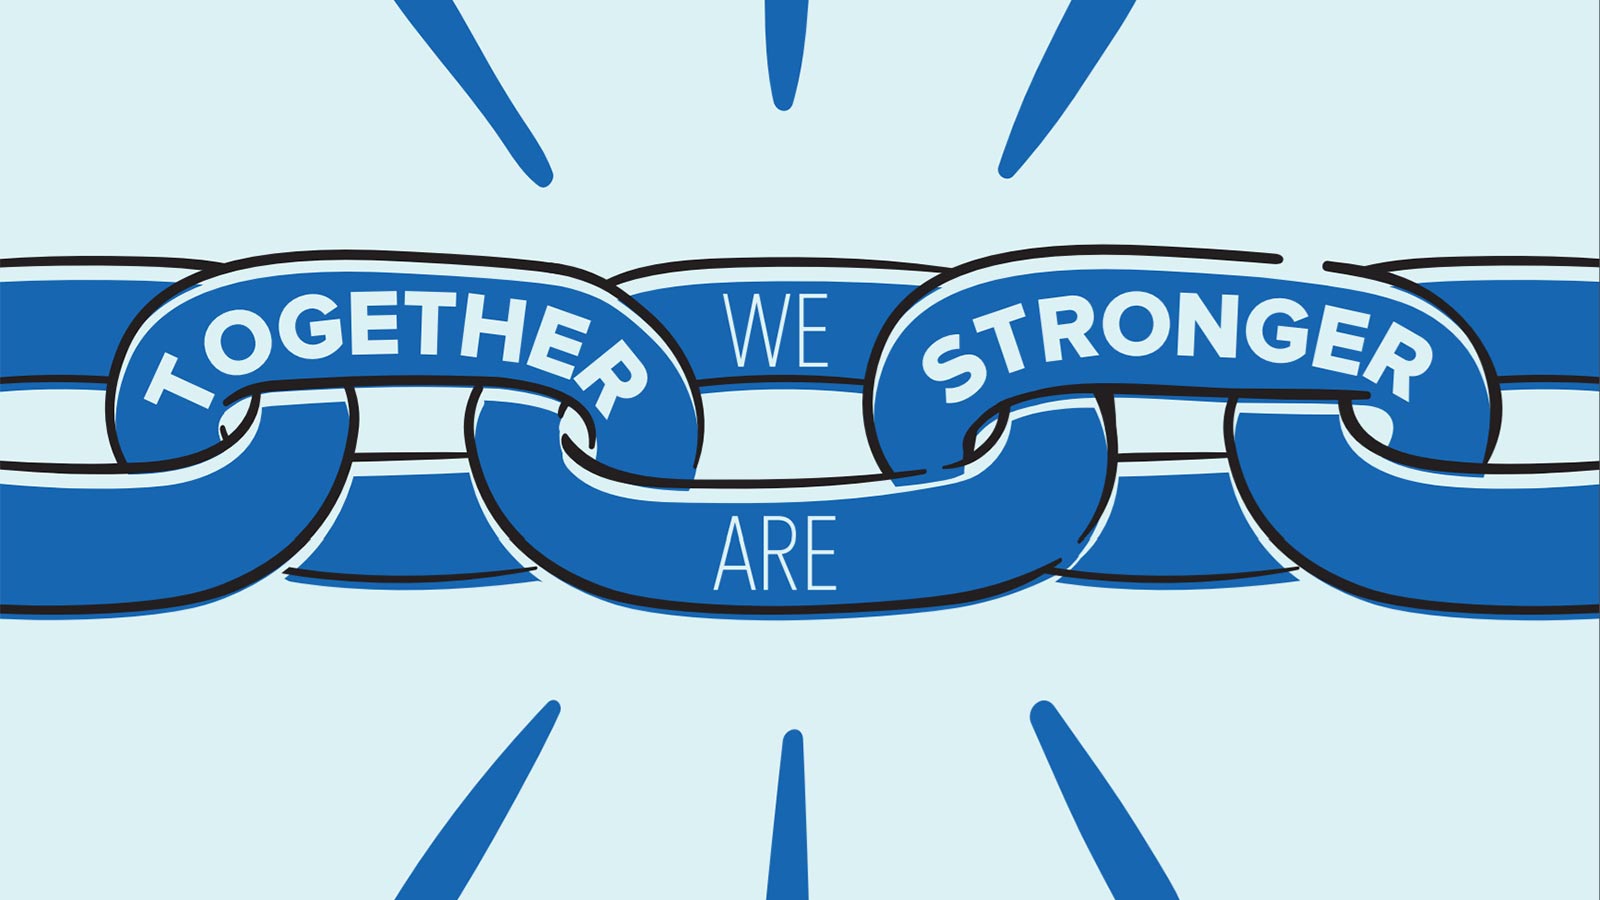 UK printing company launches ‘Together We Are Stronger’ campaign to support the NHS